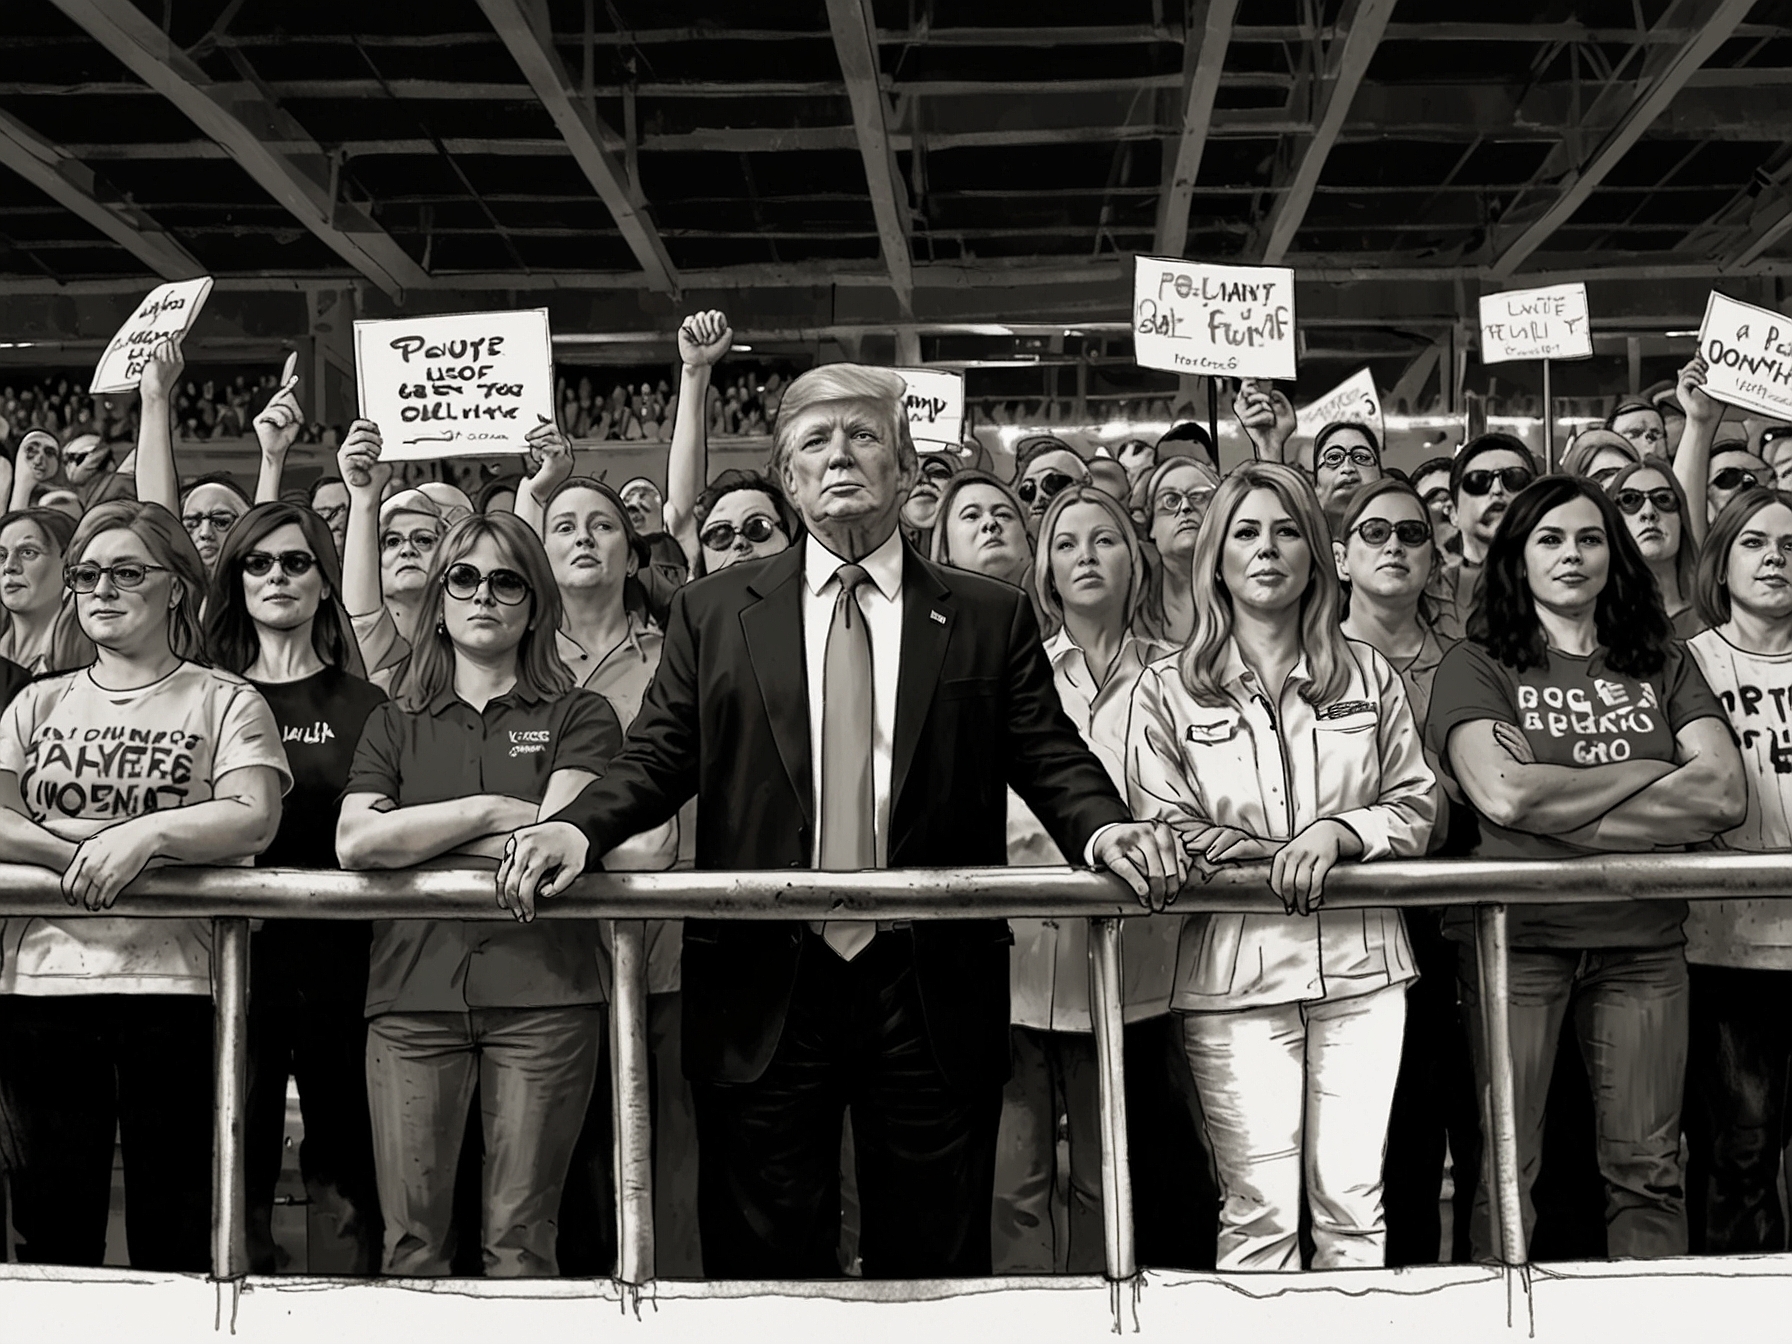 Supporters at a Trump rally showcasing their loyalty and commitment despite his legal issues, symbolizing the resilient and fervent backing of his base.